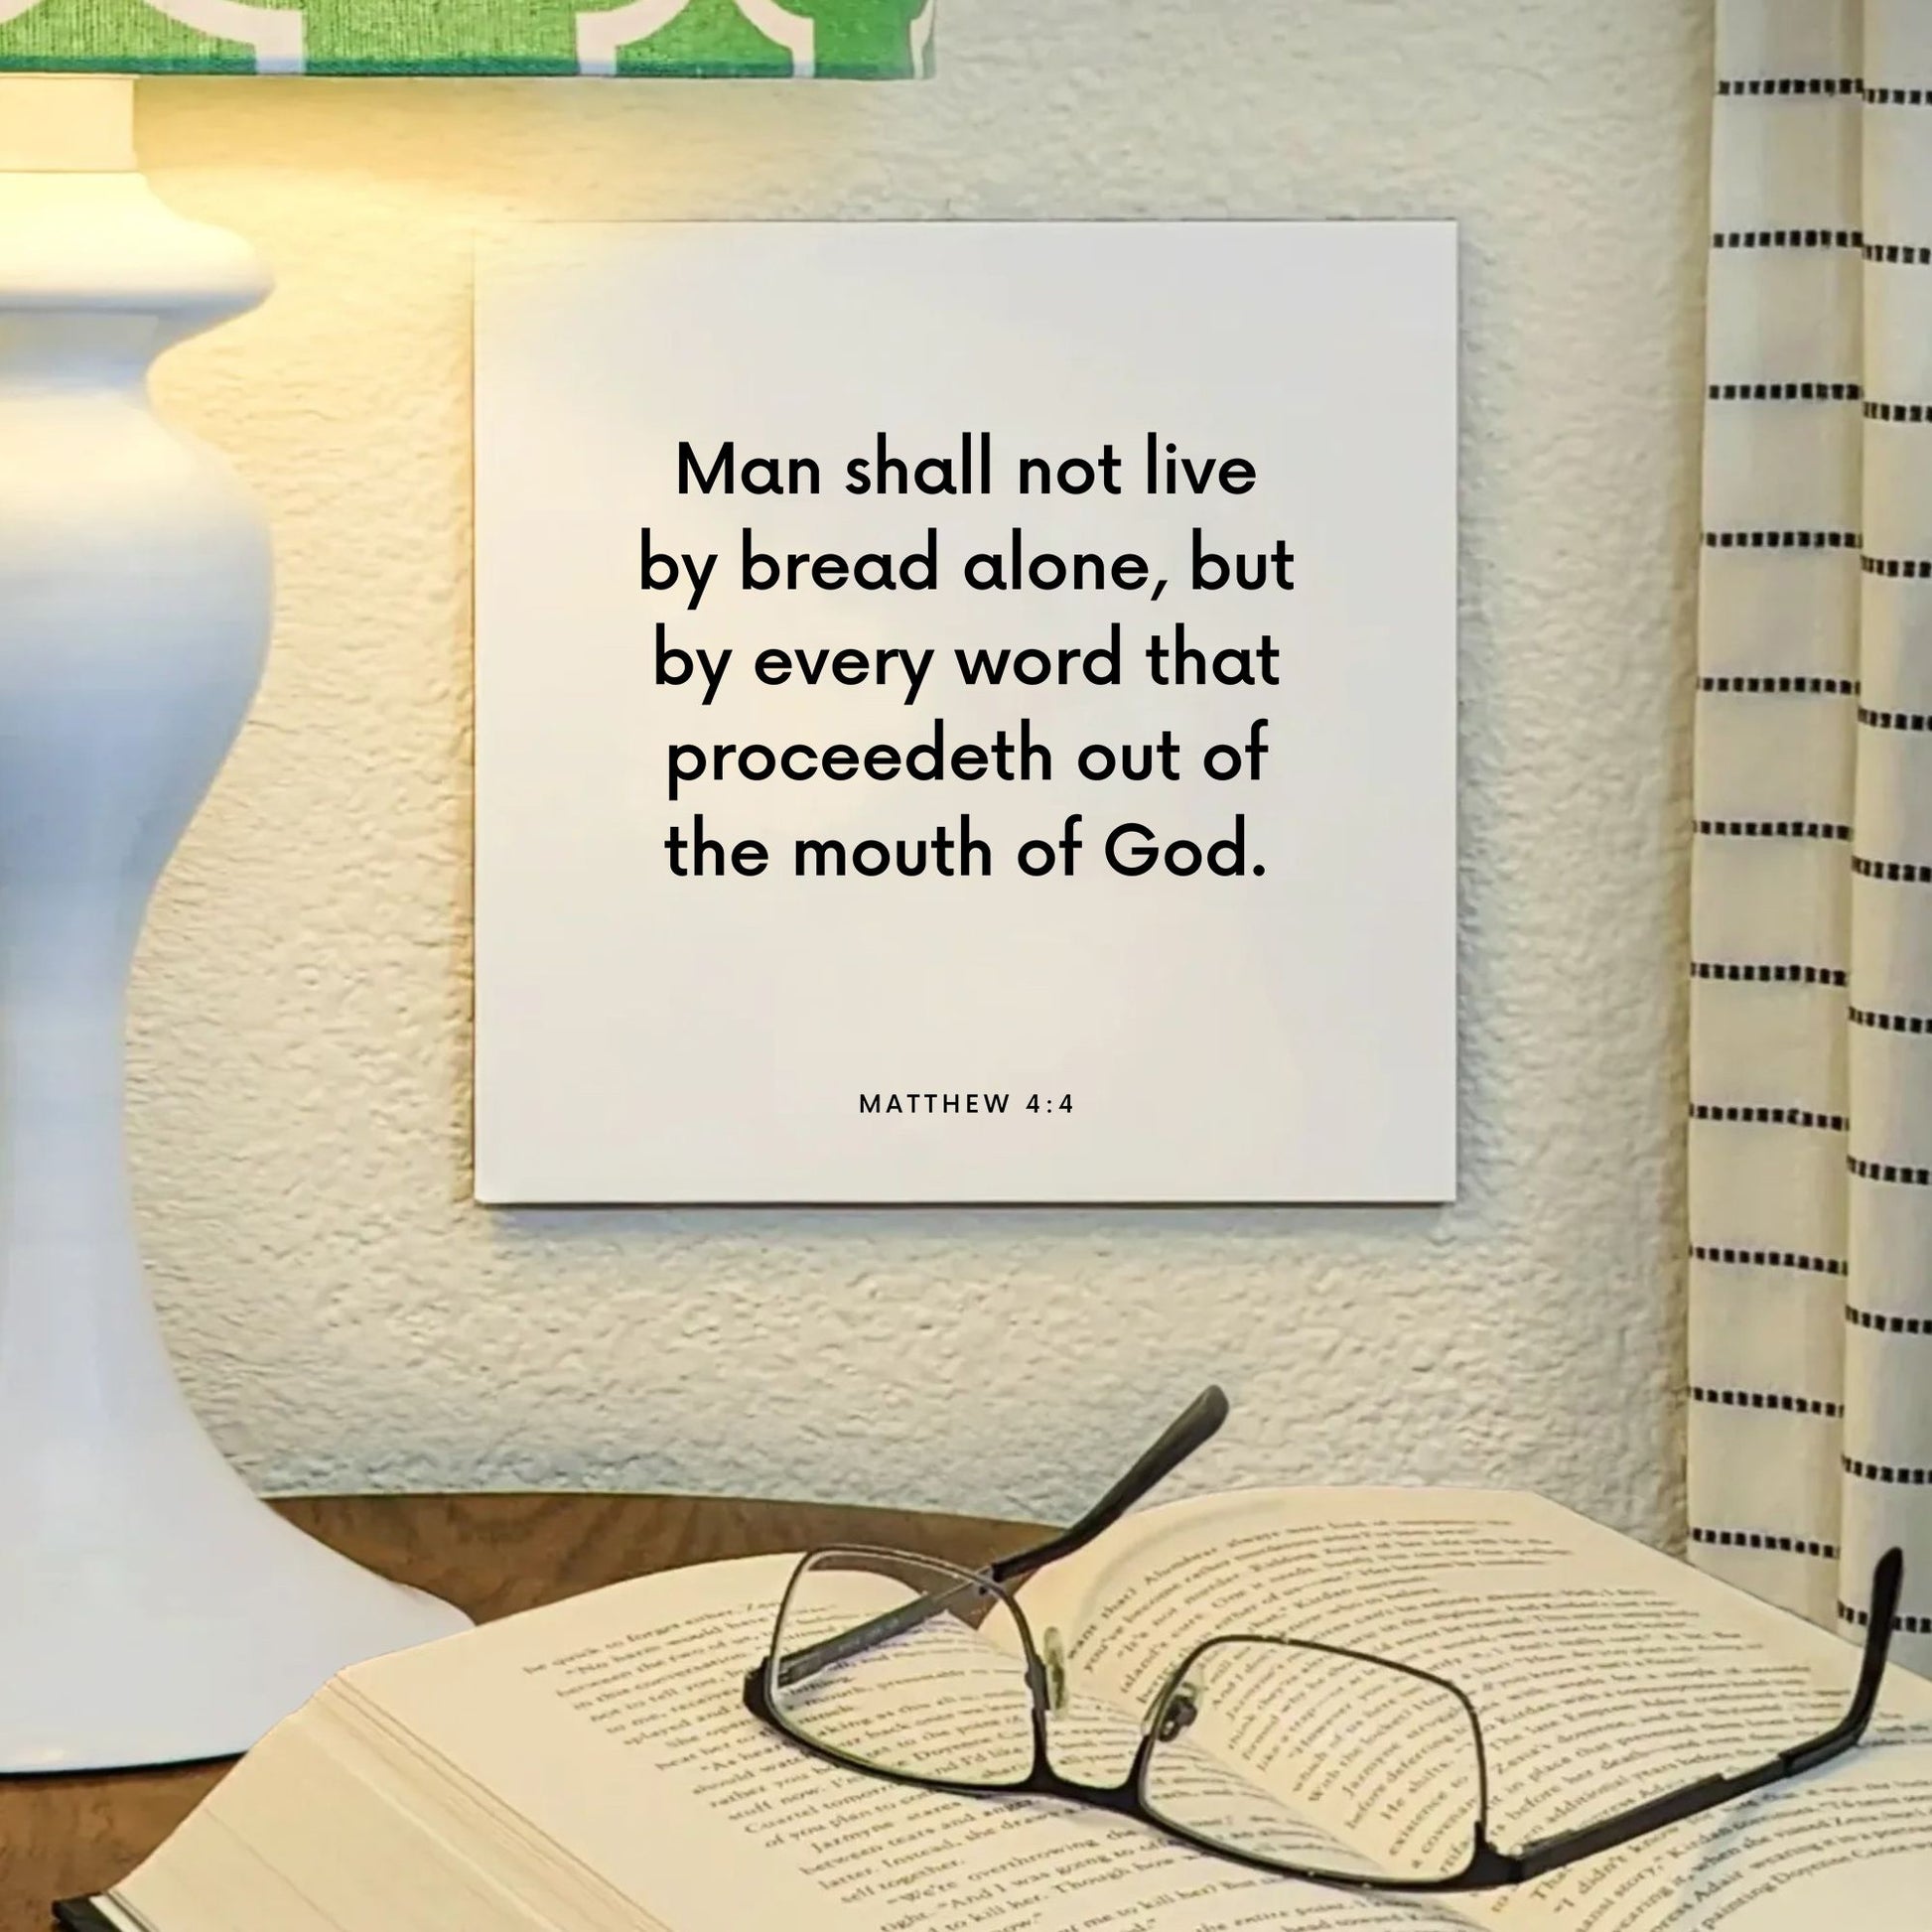 Lamp mouting of the scripture tile for Matthew 4:4 - "Man shall not live by bread alone, but by every word"